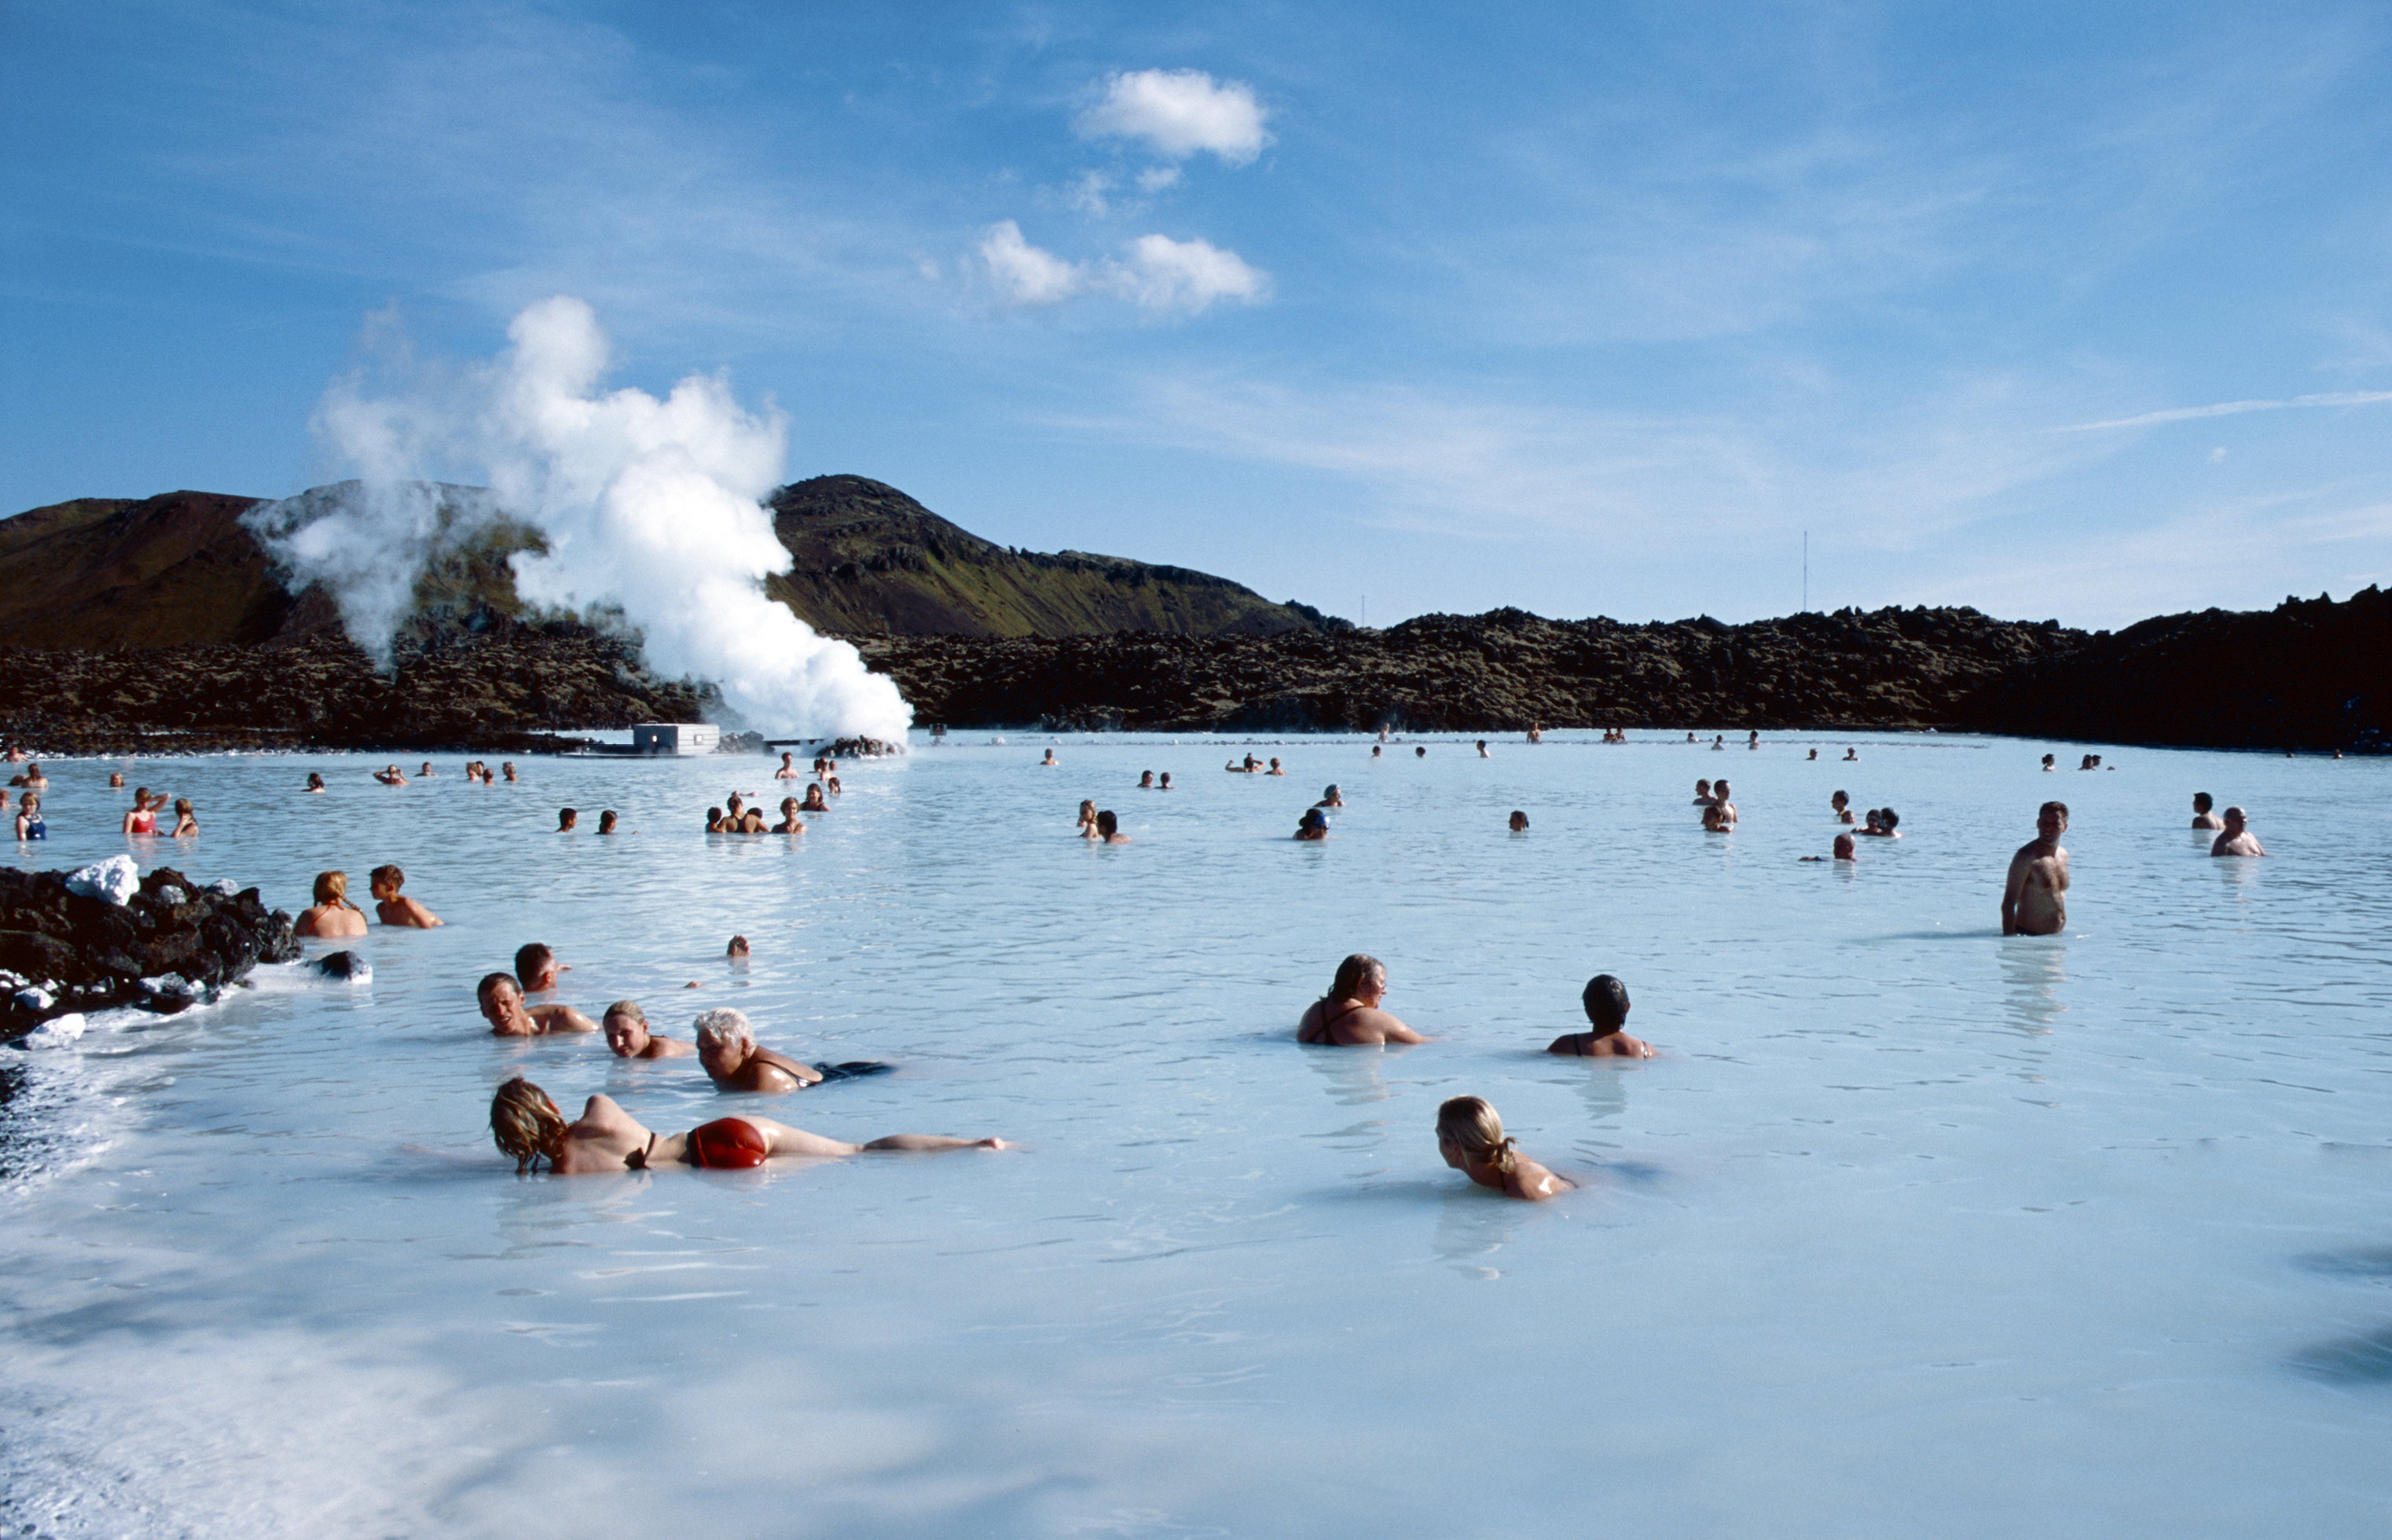 Blue lagoon spa is the most popular spa in Iceland